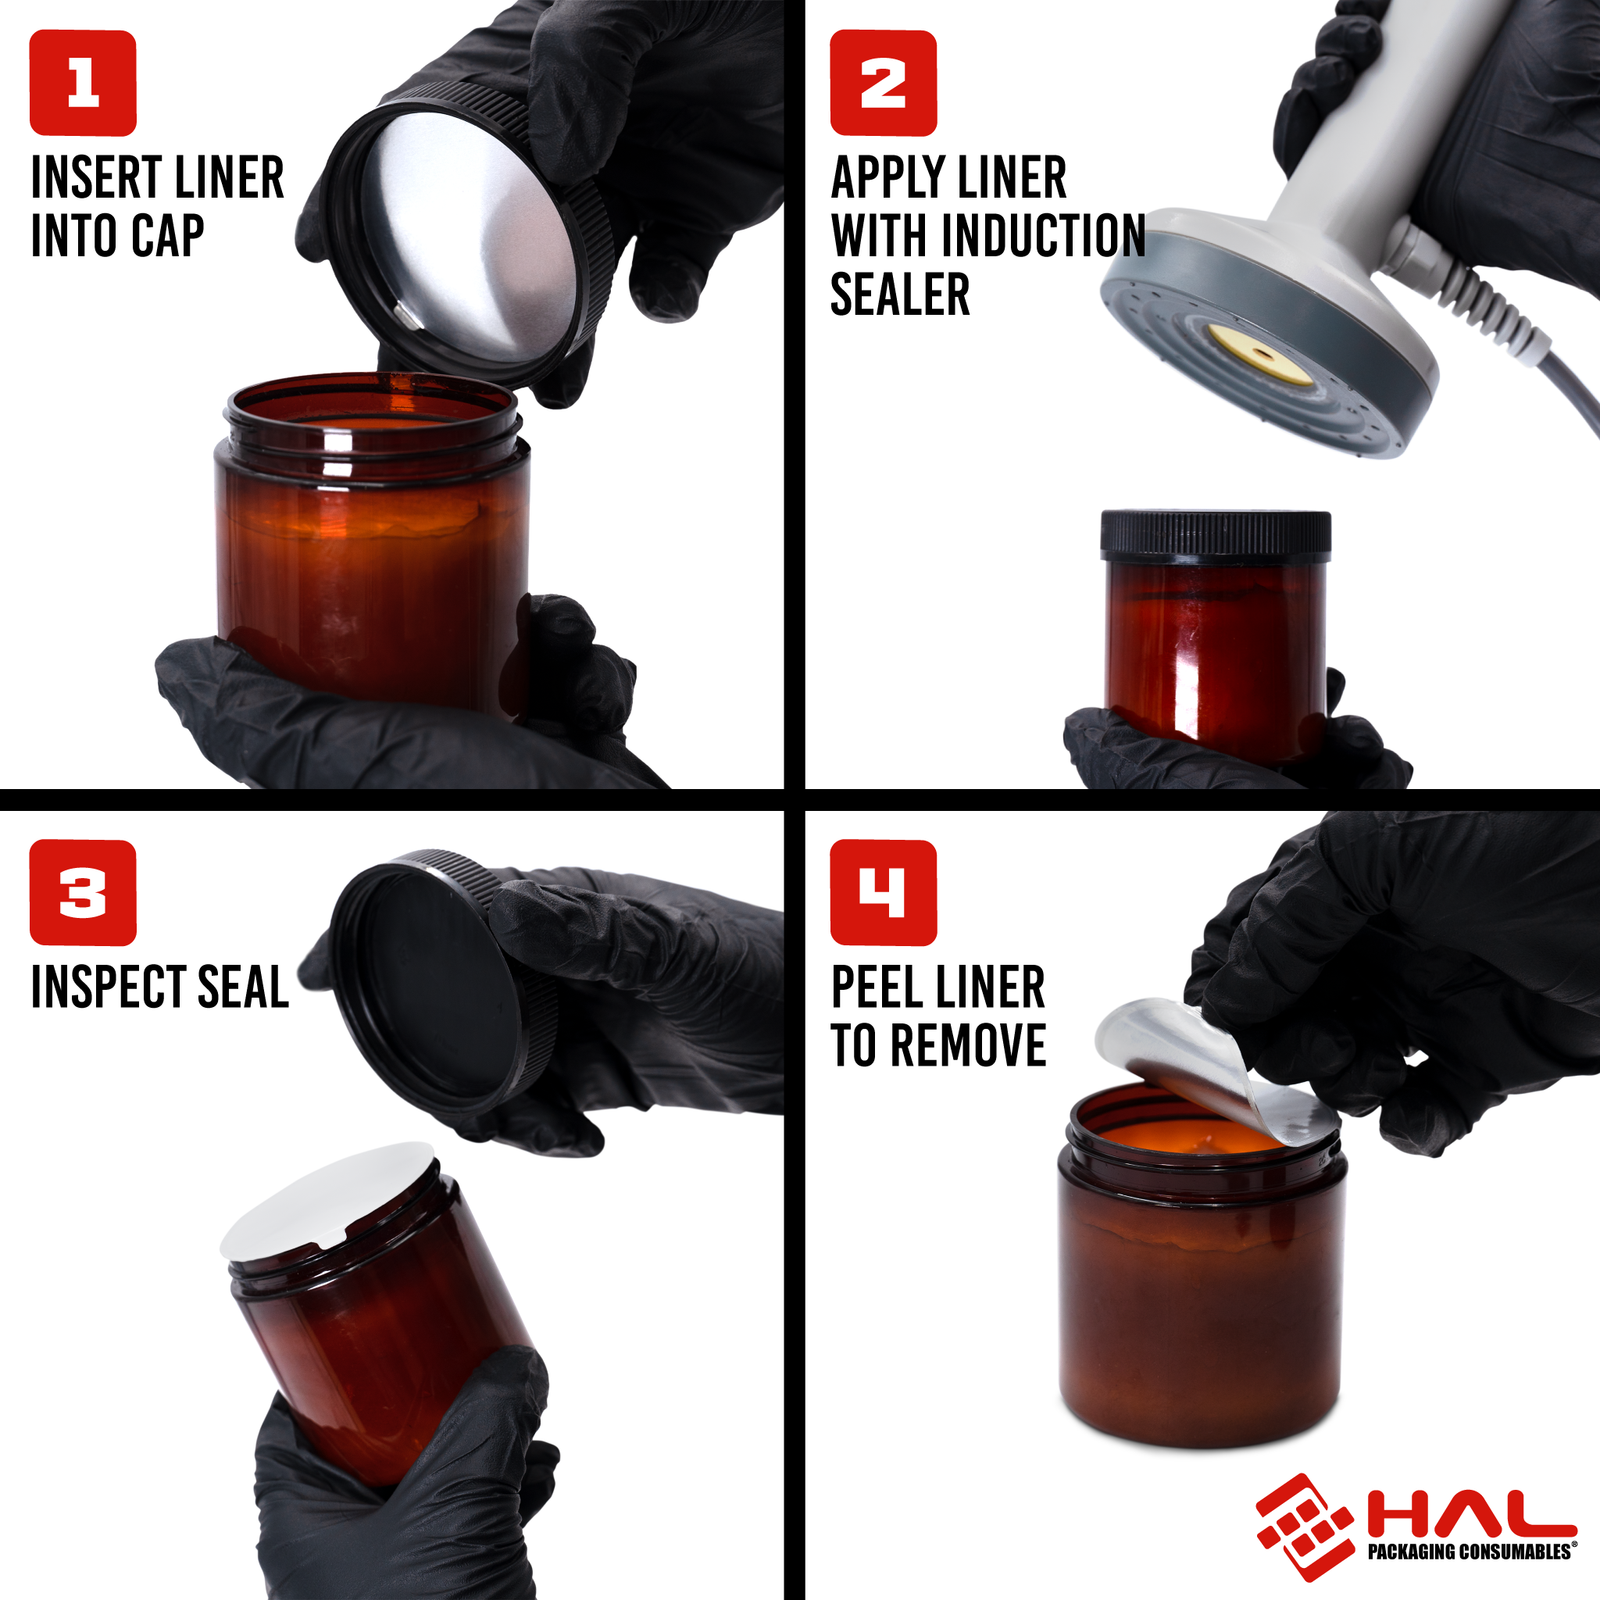 How to seal a plastic container with an induction liner using a manual induction sealer. 